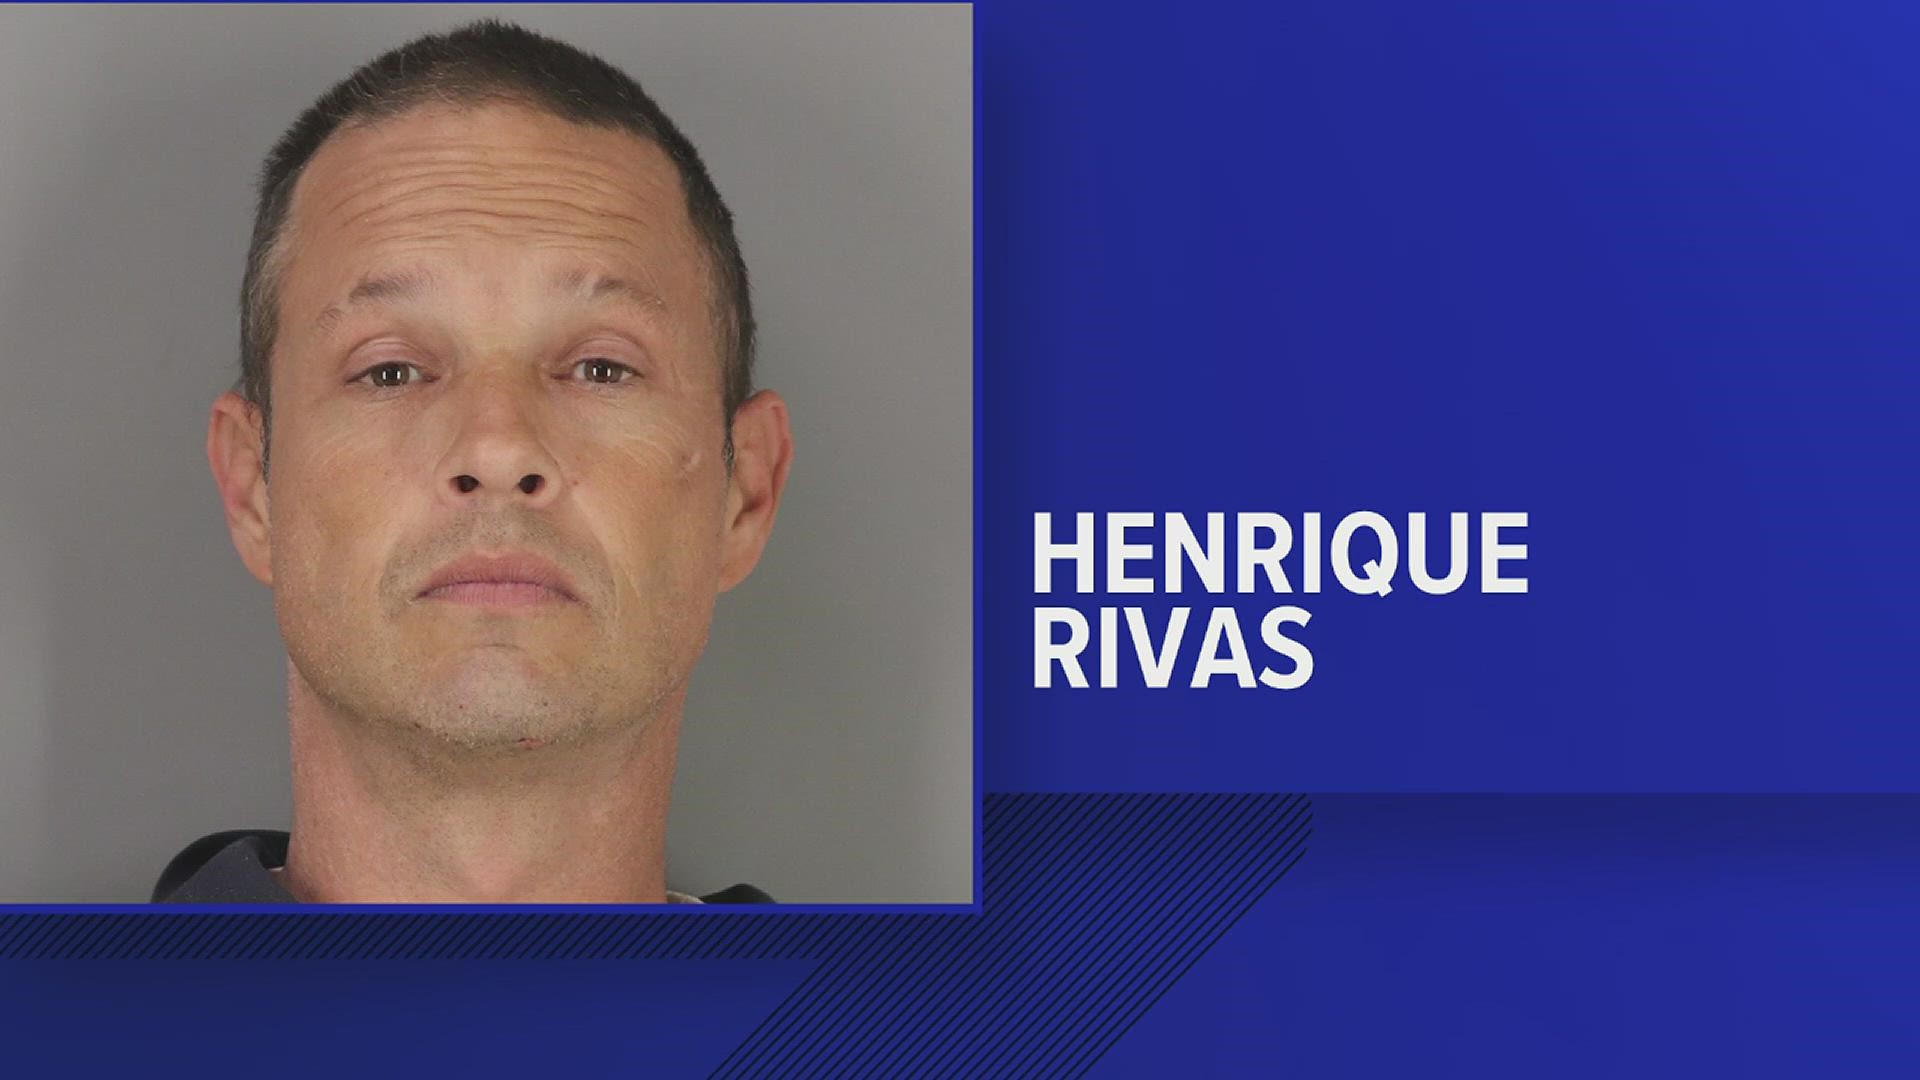 Henrique Rivas was charged with aggravated robbery and faced up to 20 years in prison, but his sentenced was enhanced due to prior convictions.